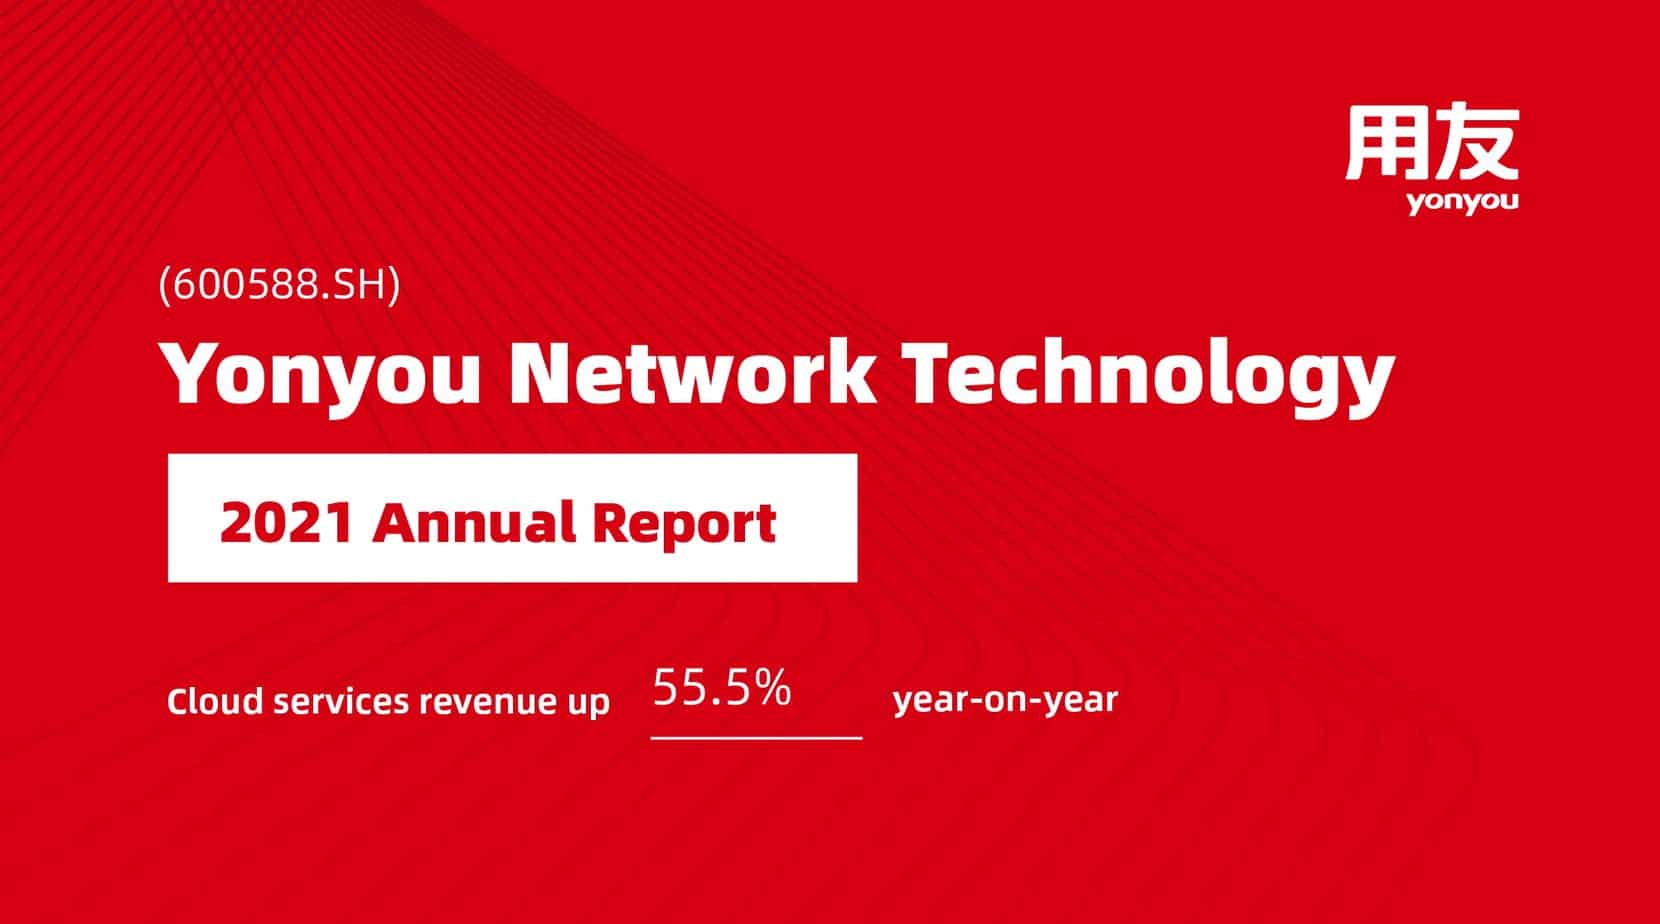 Yonyou Network Technology Announces its Annual Report 2021, Cloud Services Revenue Up 55.5% Year-on-Year